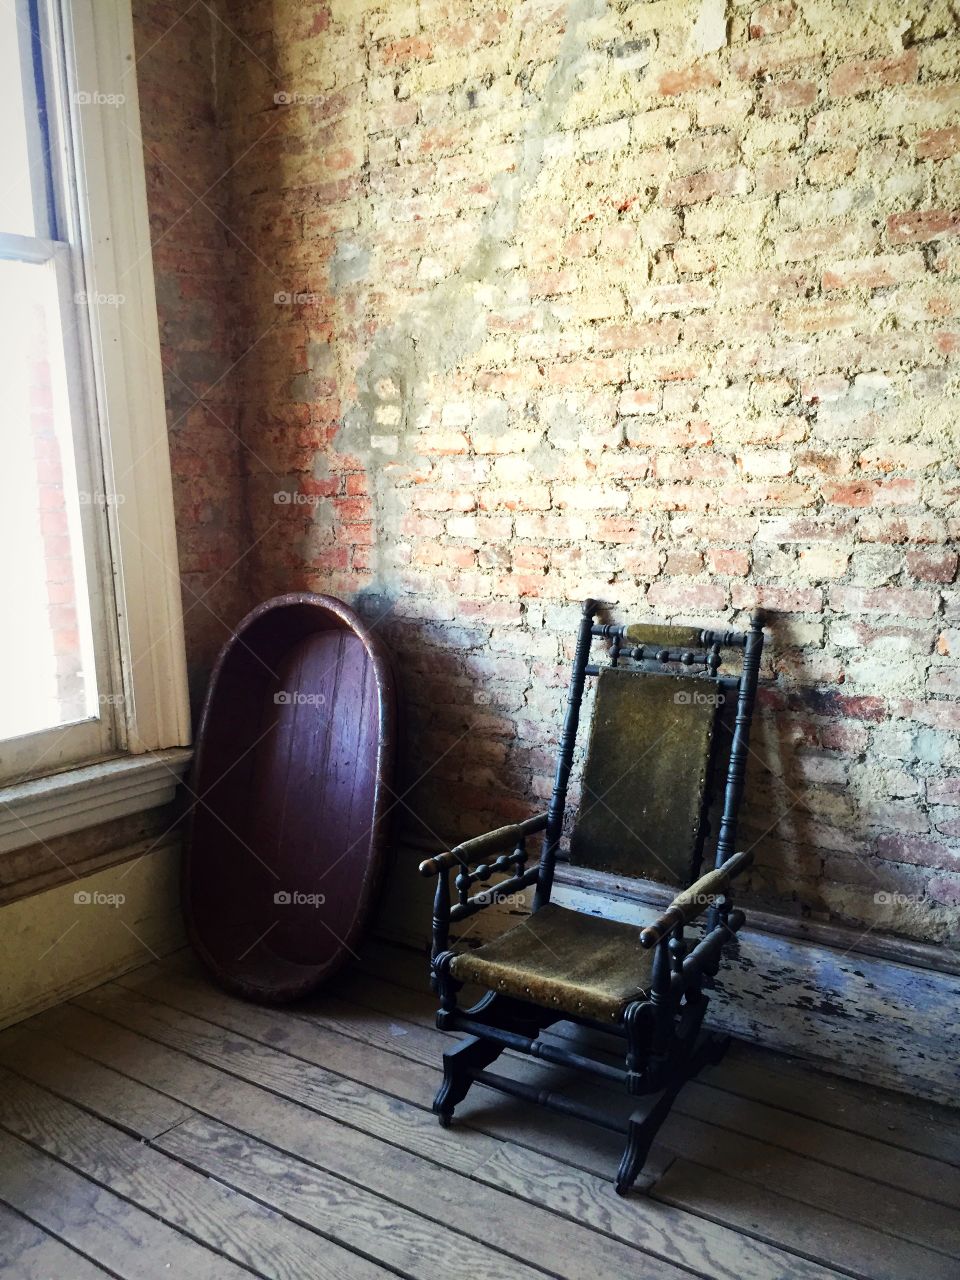 The 1800s Room